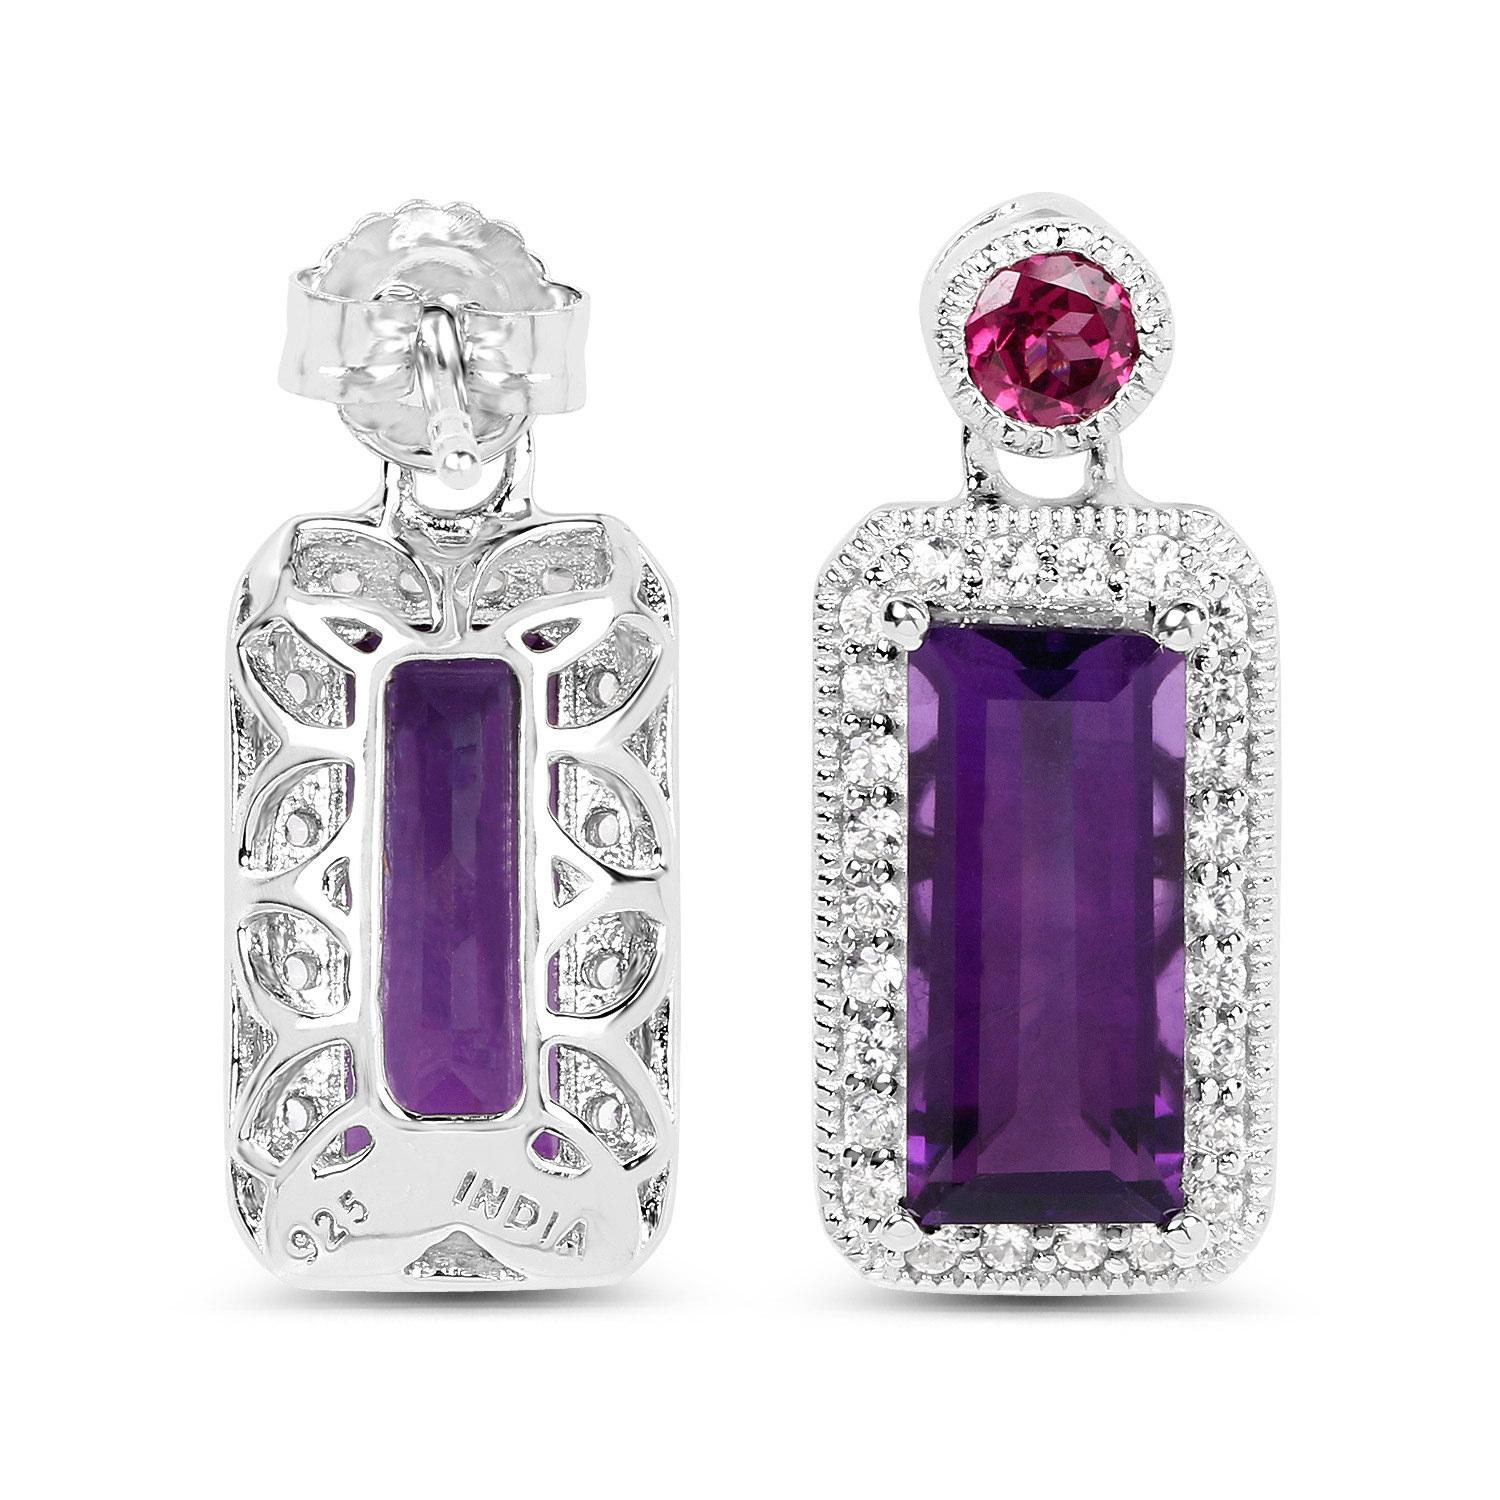 Natural Amethyst and Rhodolite Dangle Earrings 7 Carats Sterling Silver In Excellent Condition For Sale In Laguna Niguel, CA